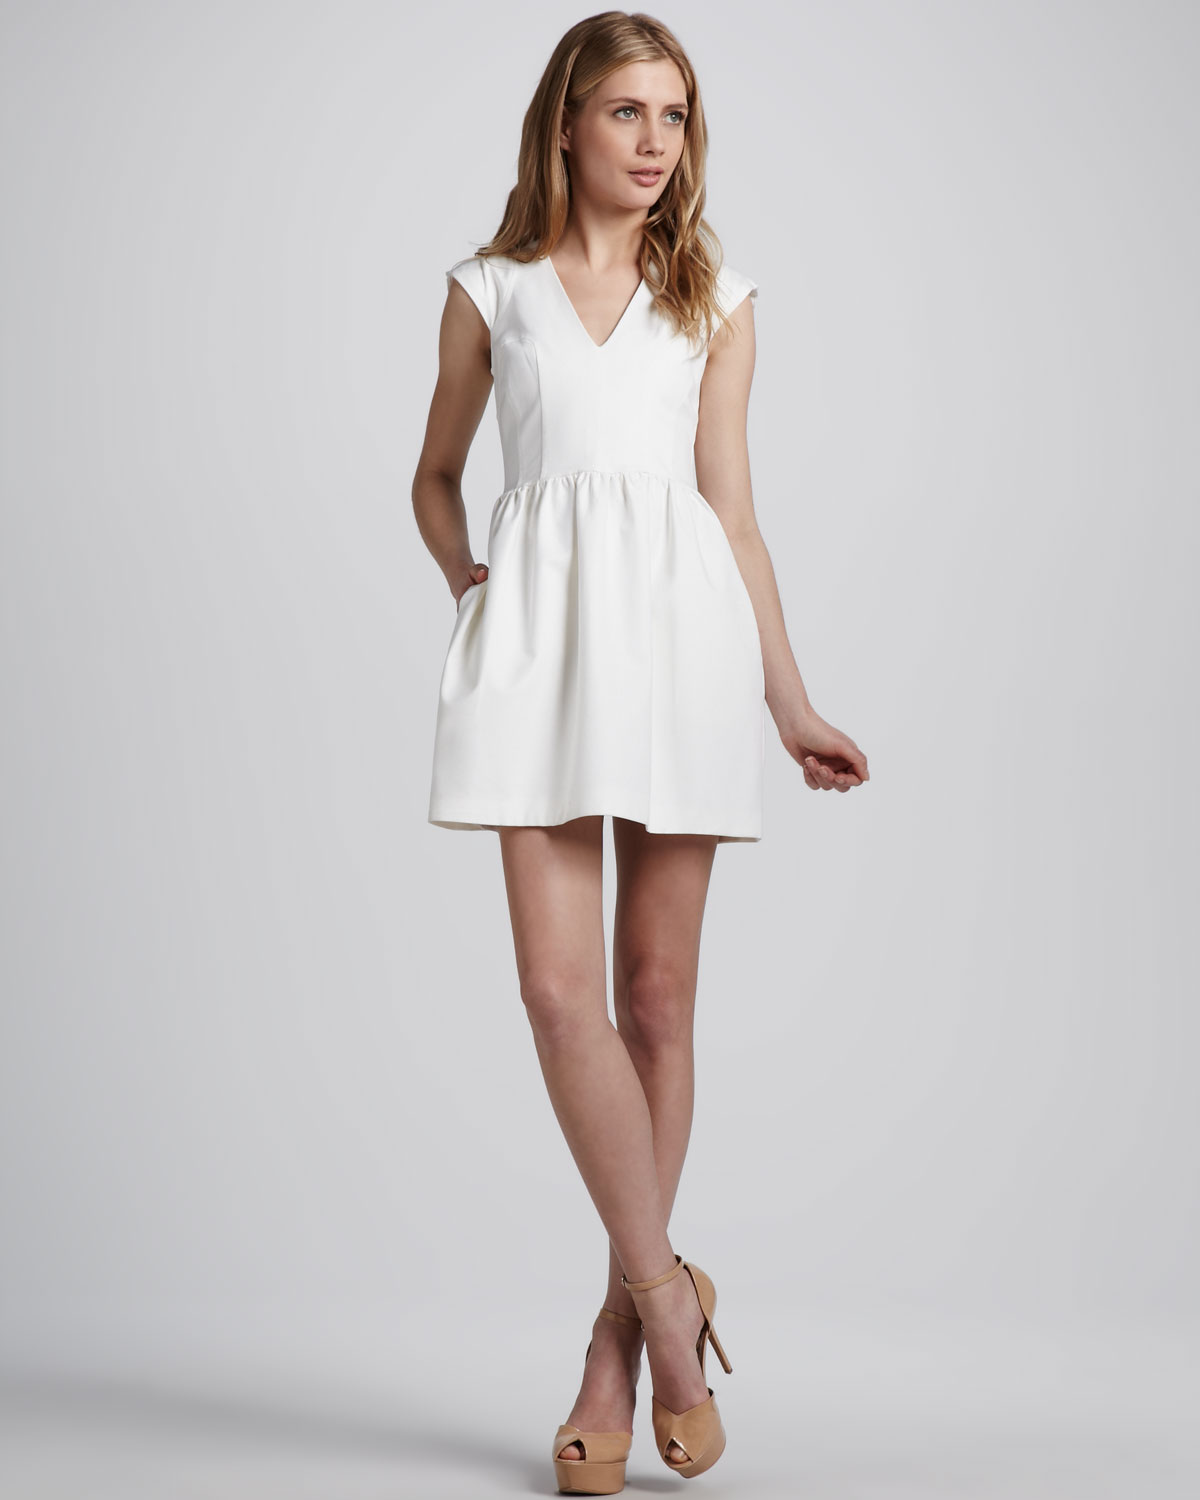 French Connection Stretchtwill Vneck Dress in White | Lyst